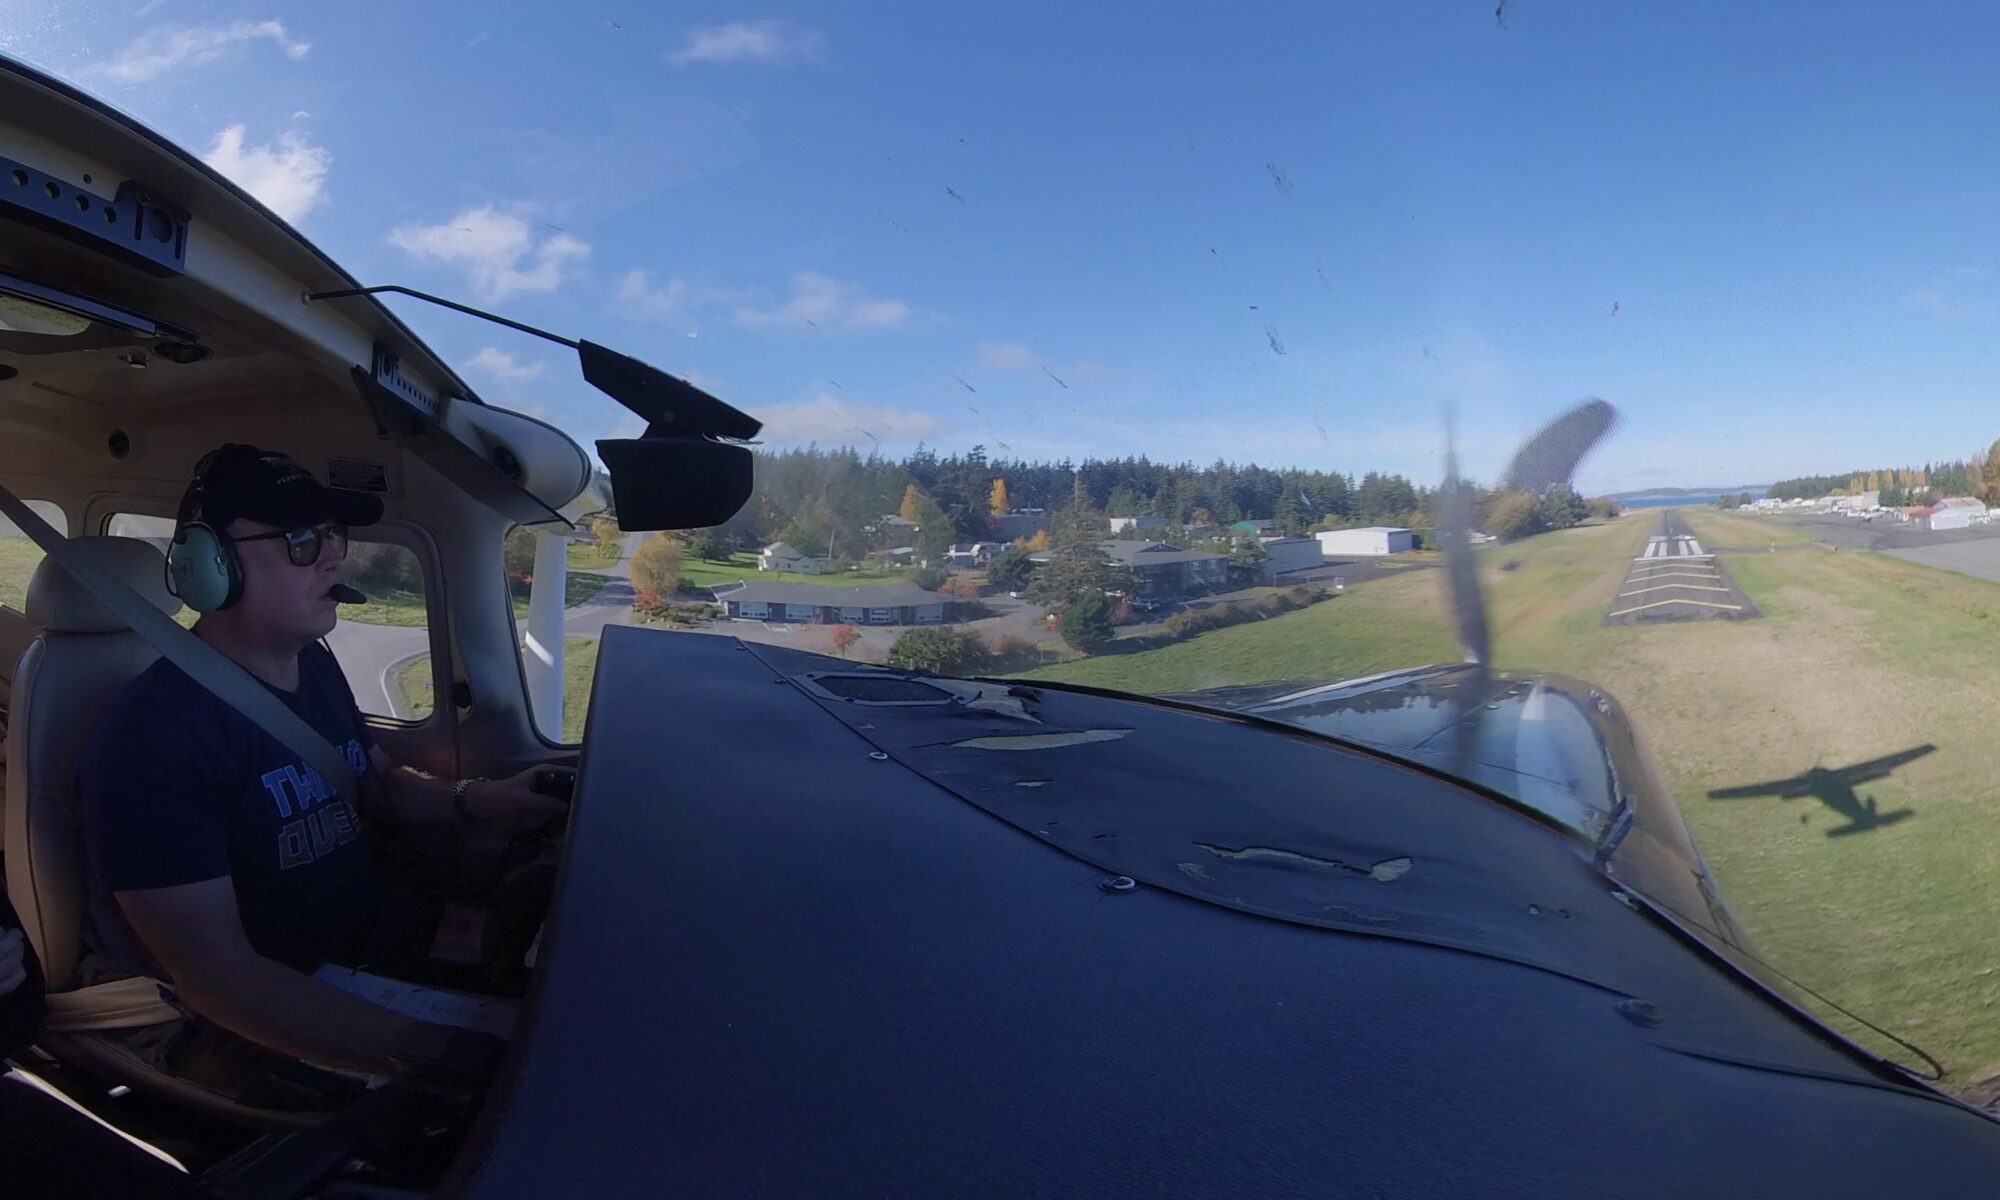 Bob Watson piloting a light plane on a sunny day as it approaches the runway to land